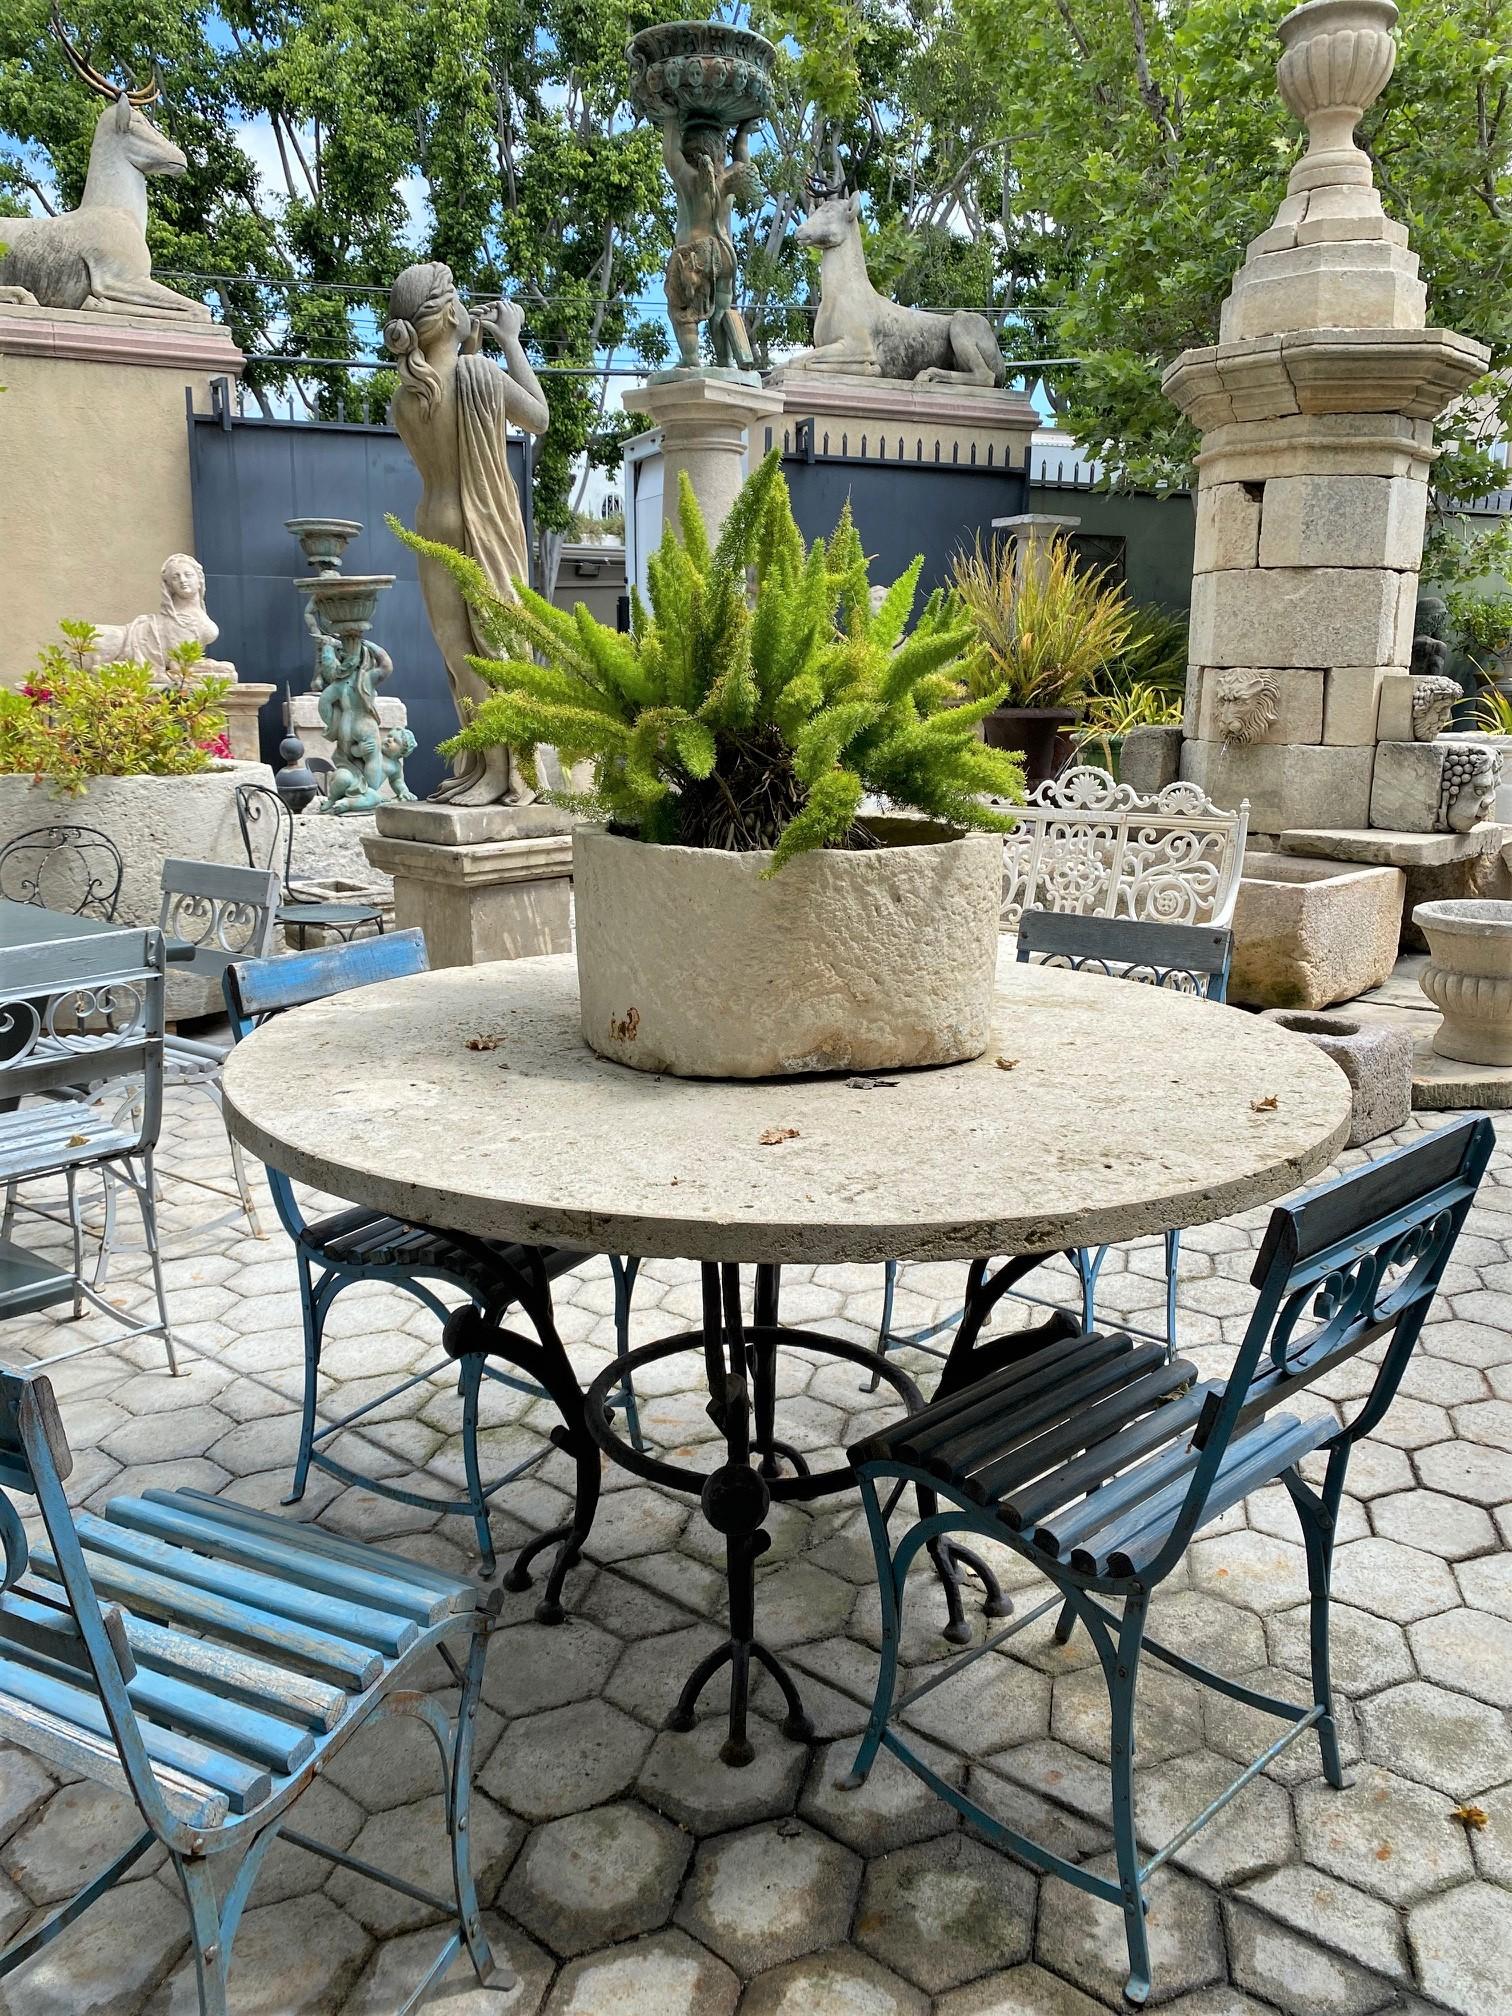 Metal Large Round Carved Stone & Iron Garden Patio Dining Table Giacometti Style LA CA